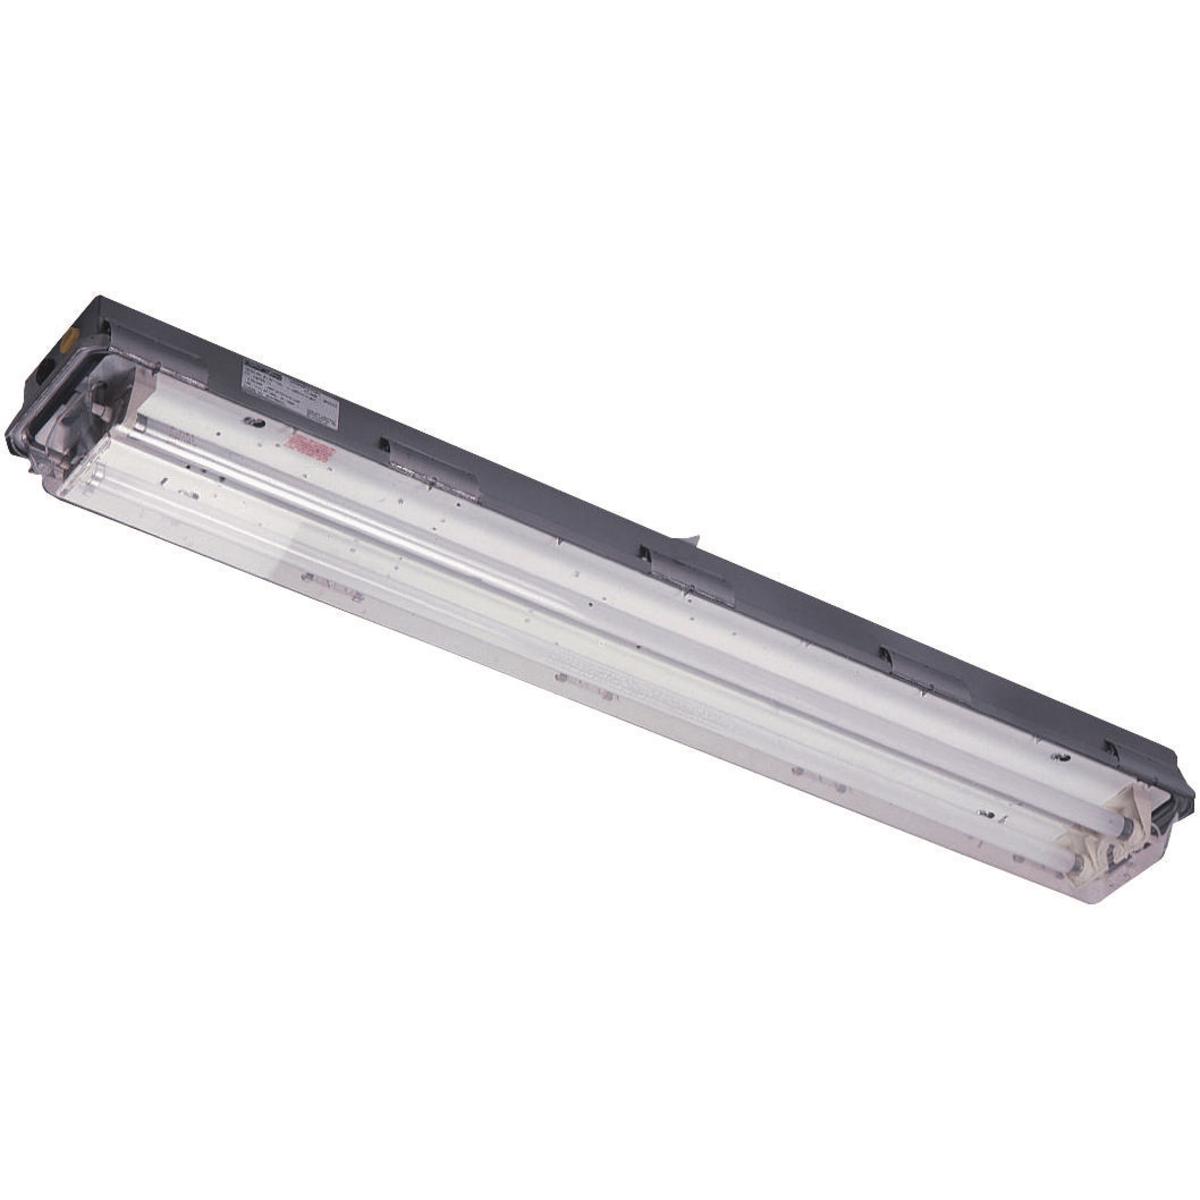 Hubbell LZ2S322DC120 LZ2S Series - Stainless Steel - 32 Watt Fluorescent Light Fixture (Two 4-Foot Lamps Not Included) - Double-Ended Lamp Type - 120VDC -Hub Size 3/4 Inch NPT  ; NEMA 4X & IP66 rated stainless enclosure with Lexan® impact resistant polycarbonate lens. ; Two 3